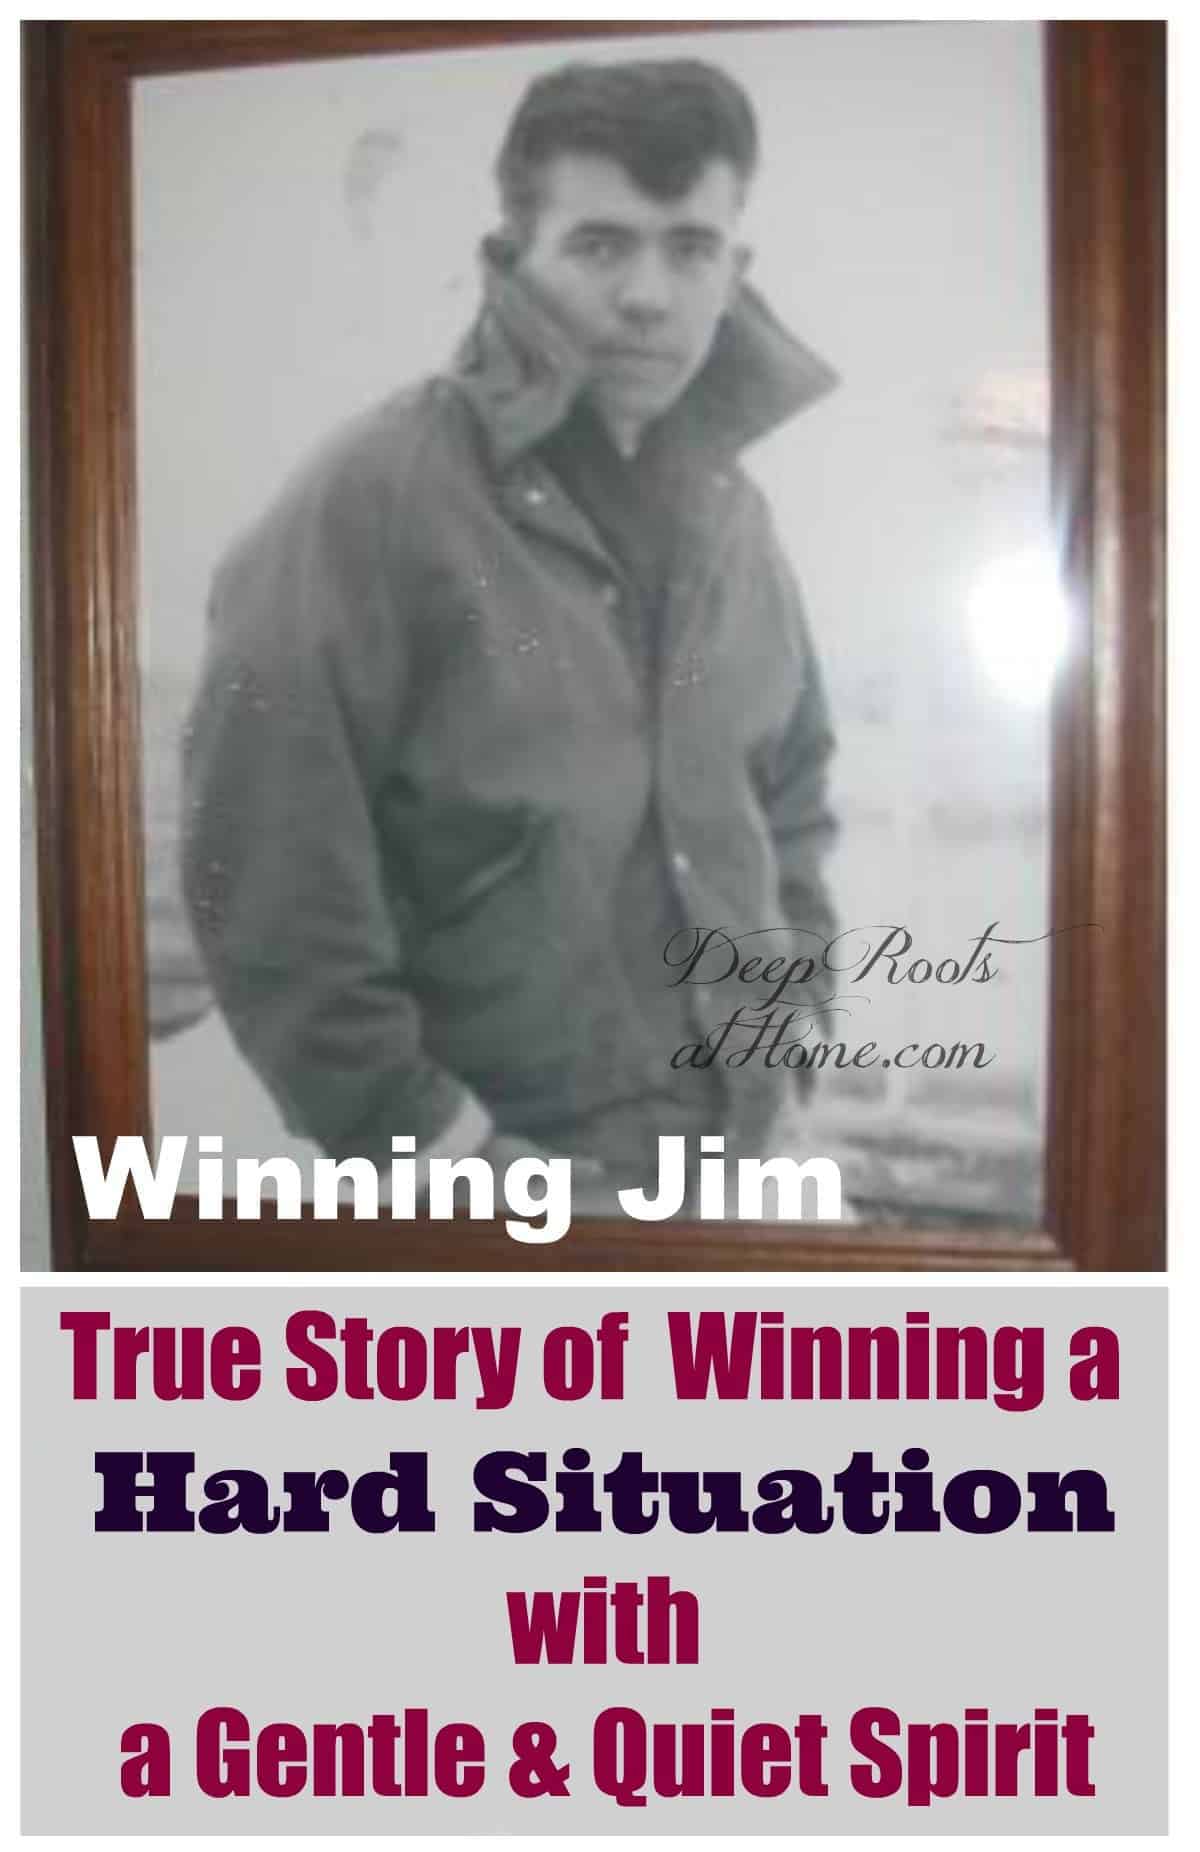 True Story of Winning a Hard Situation by a Gentle & Quiet Spirit. Jim Hultquist as rebellious young man before he went to prison.